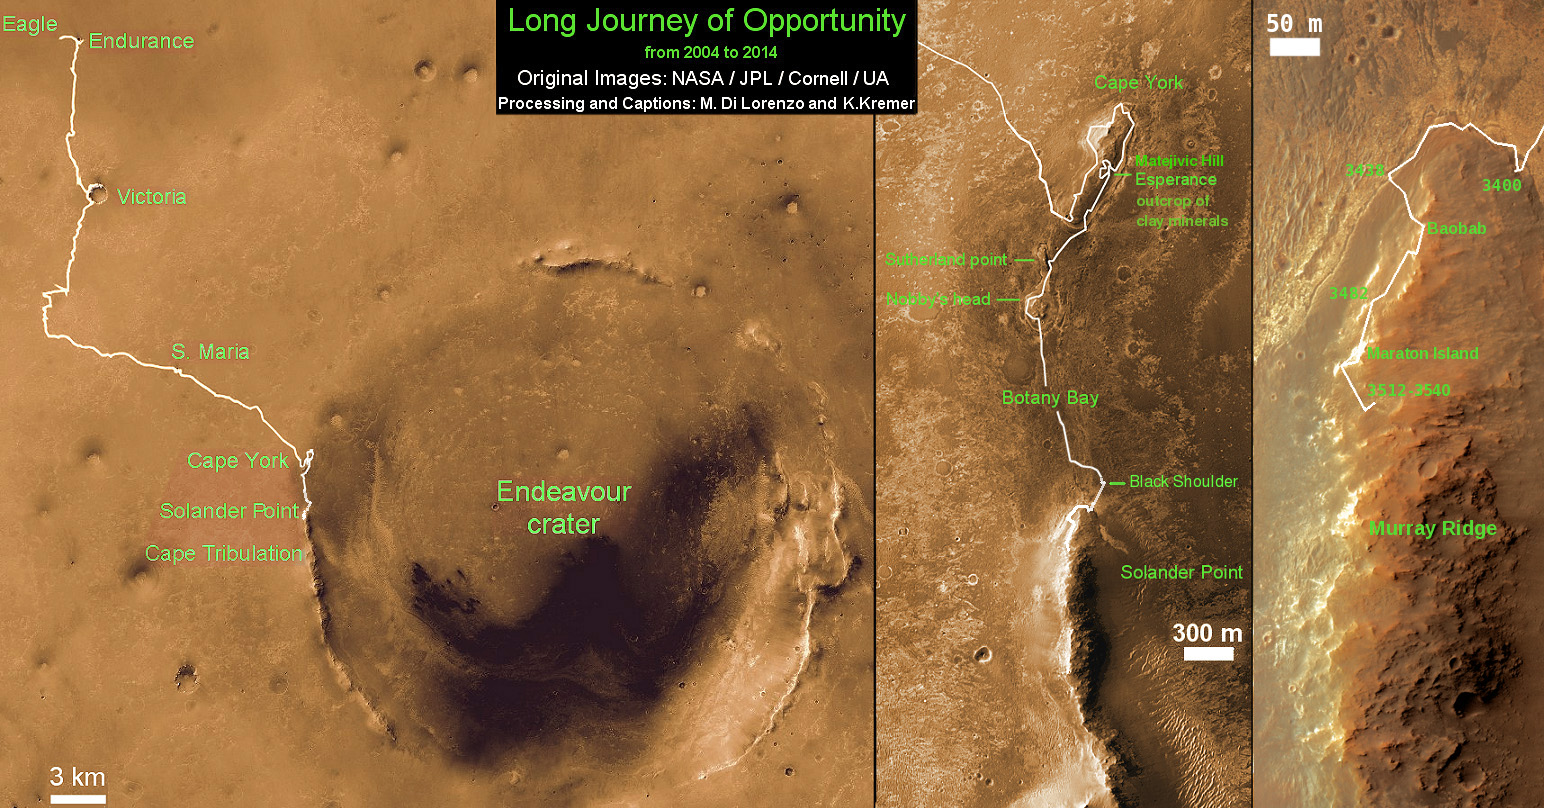 Traverse Map for NASA’s Opportunity rover from 2004 to 2014. This map shows the entire path the rover has driven during a decade on Mars and over 3560 Sols, or Martian days, since landing inside Eagle Crater on Jan 24, 2004 to current location by Solander Point summit at the western rim of Endeavour Crater. Rover will spend 6th winter here atop Solander. Opportunity discovered clay minerals at Esperance – indicative of a habitable zone. Credit: NASA/JPL/Cornell/ASU/Marco Di Lorenzo/Ken Kremer – kenkremer.com